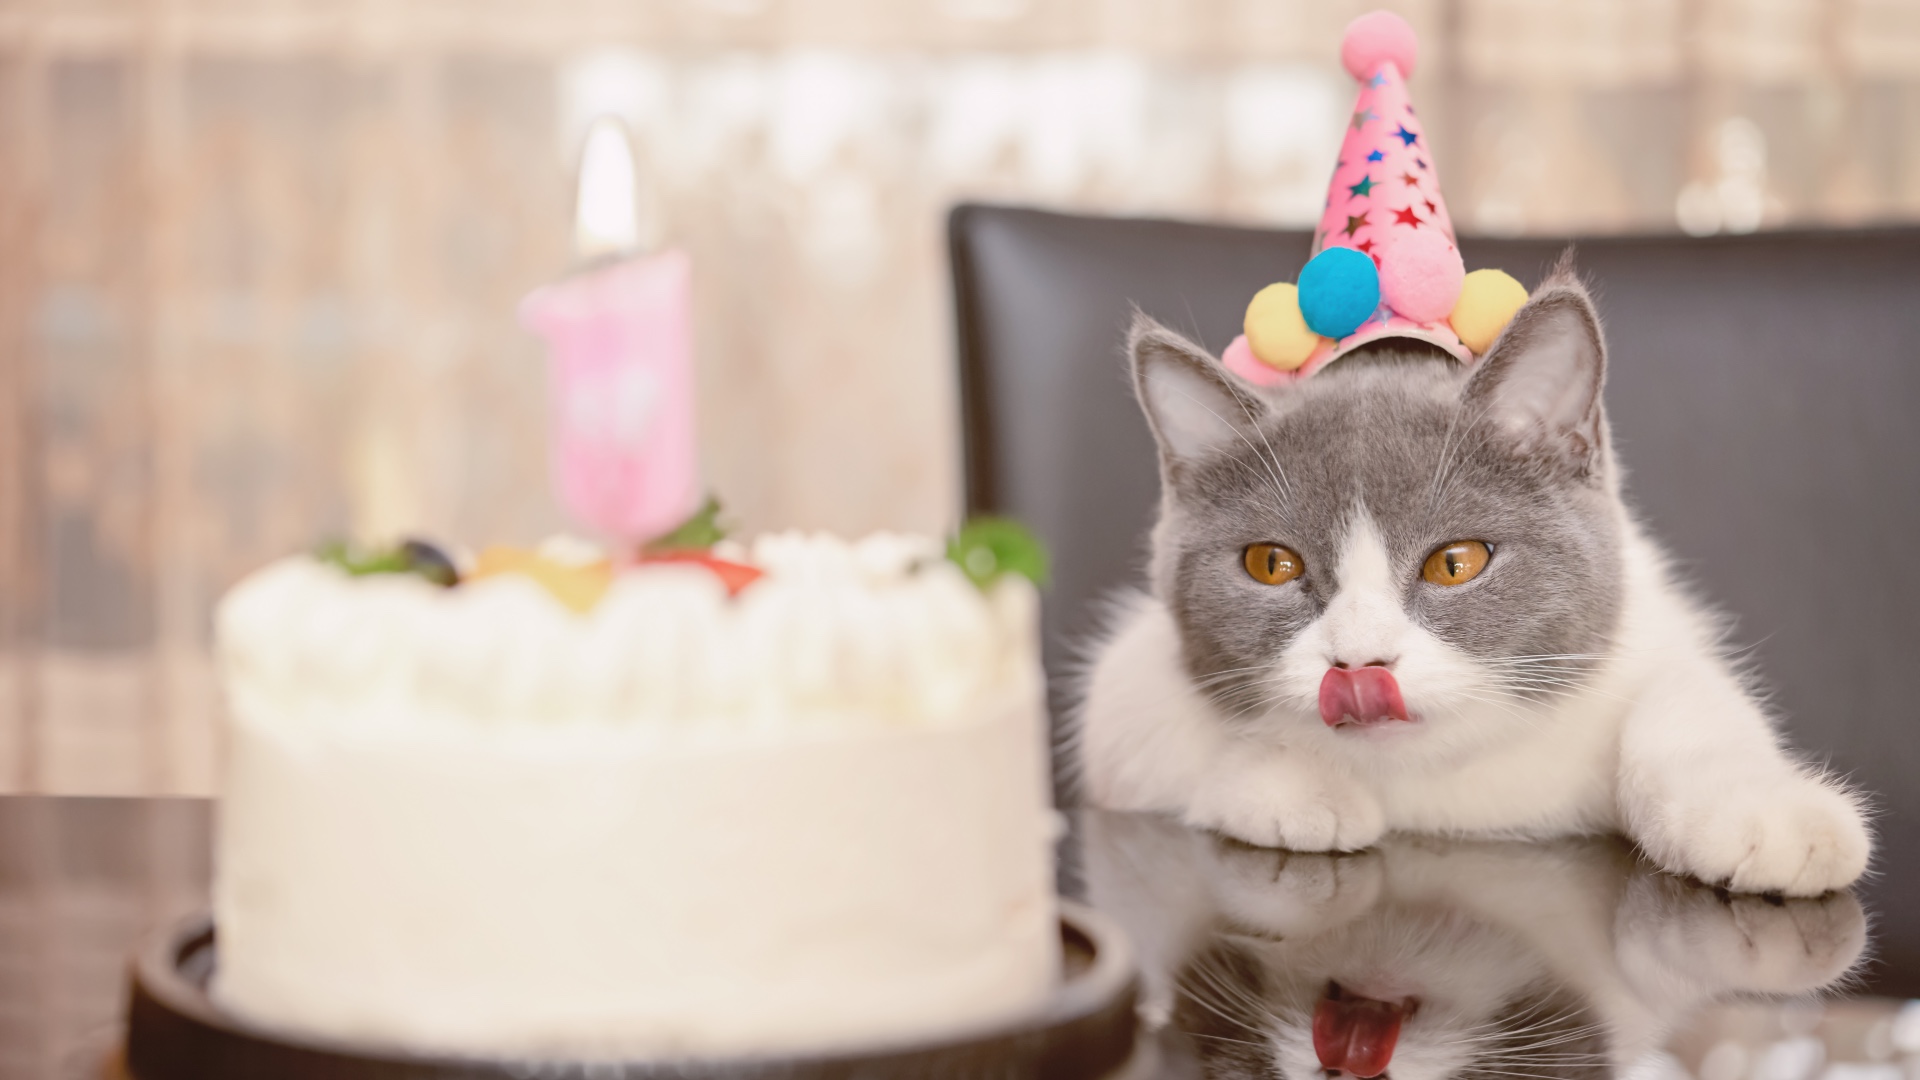 Eight cat birthday cake recipes to celebrate their special day